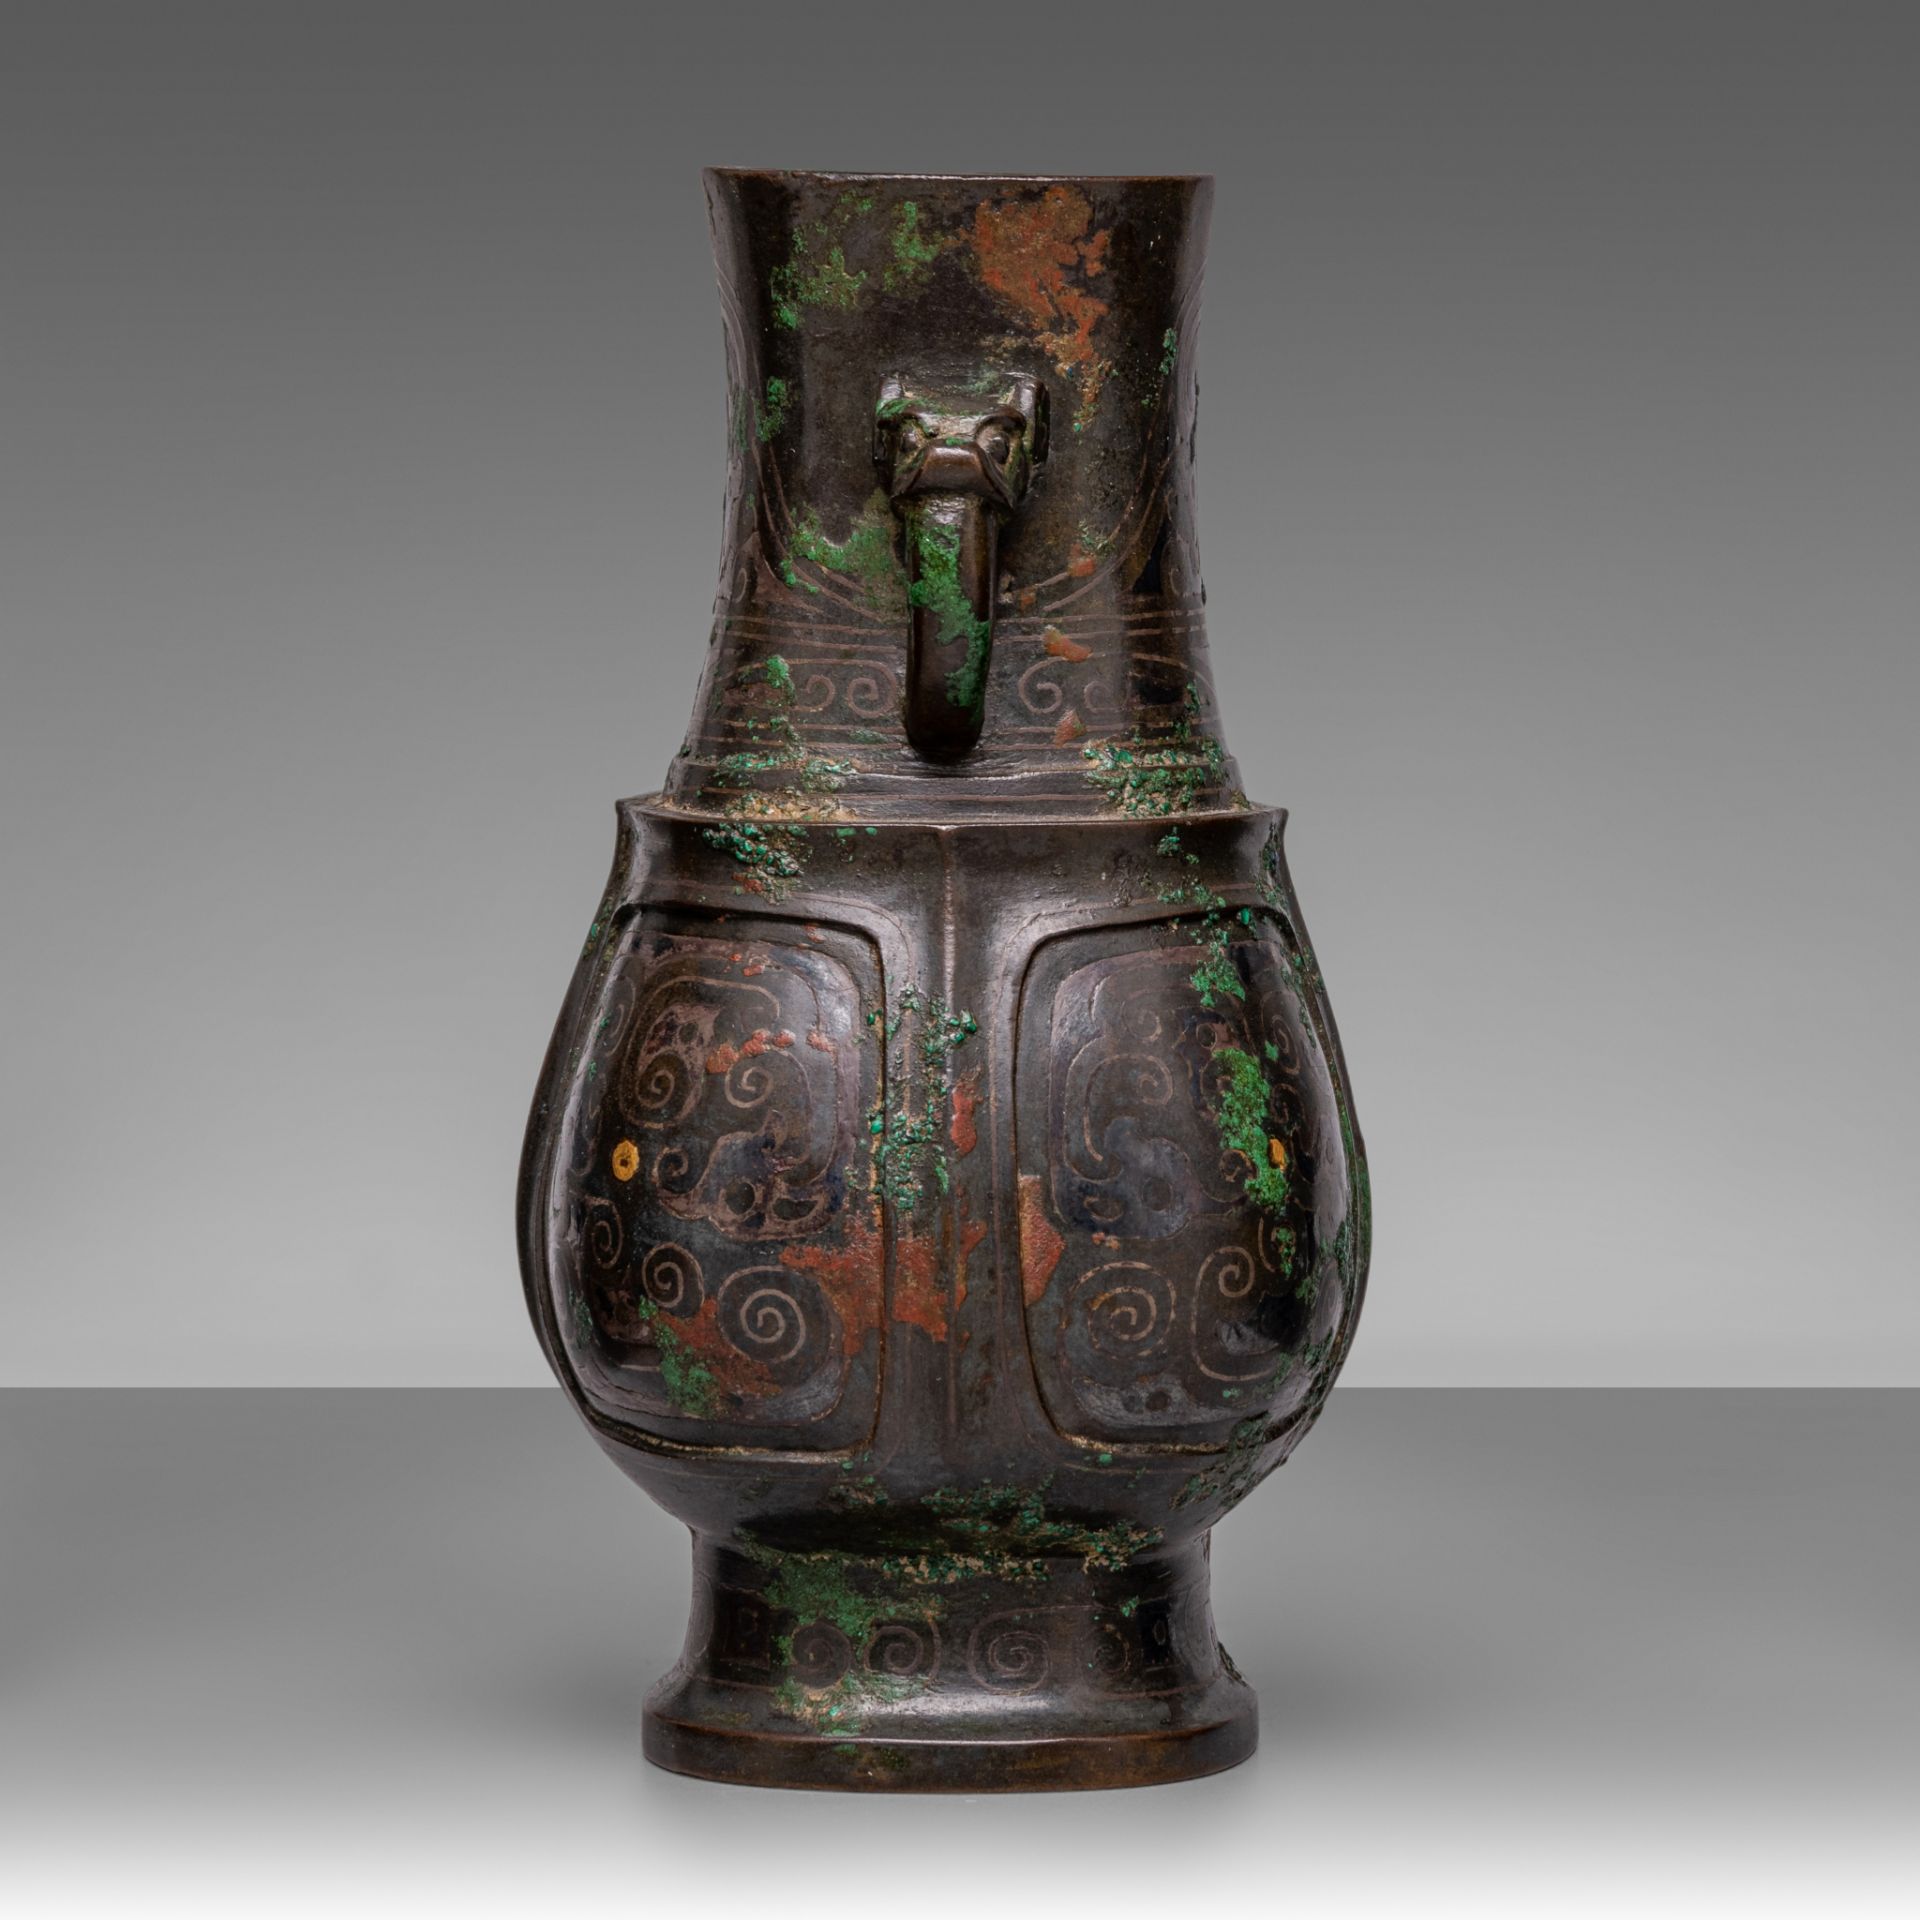 A rare and fine Chinese archaistic silver and gold inlaid bronze fanghu vase, Song - Ming dynasty, H - Image 4 of 6